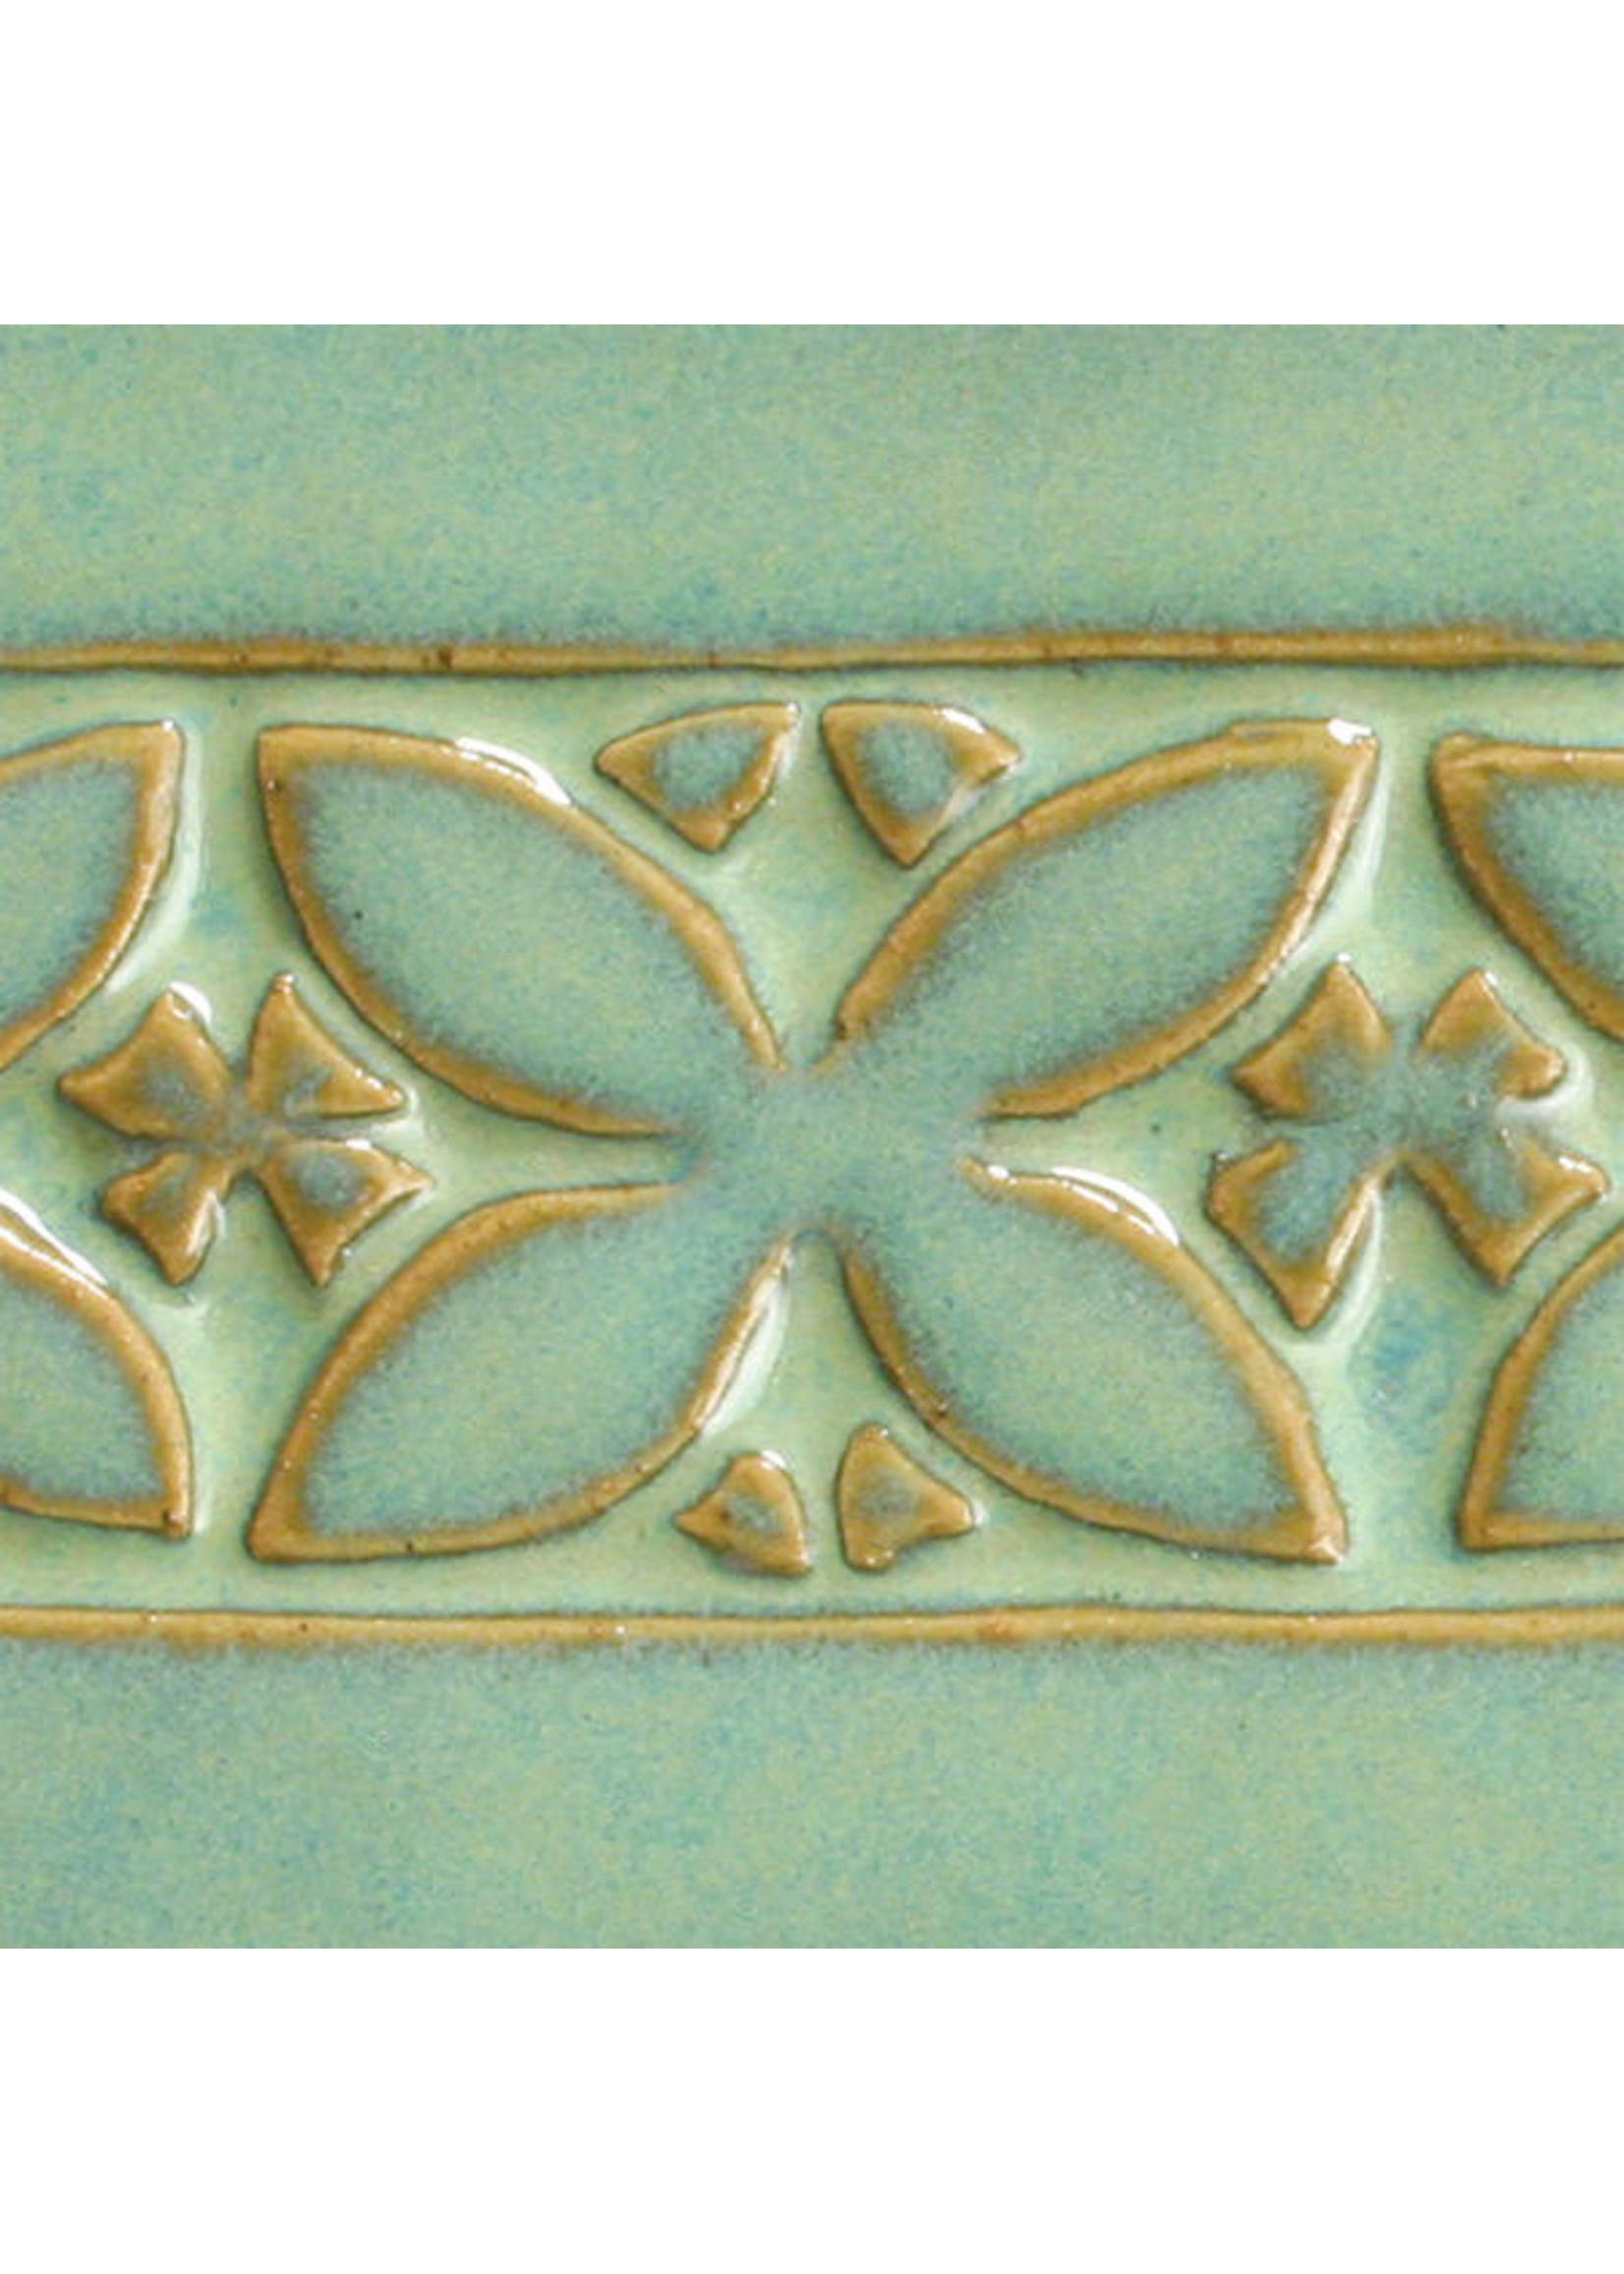 American Art Clay Co. TEXTURED TURQUOISE PC-25 Pint